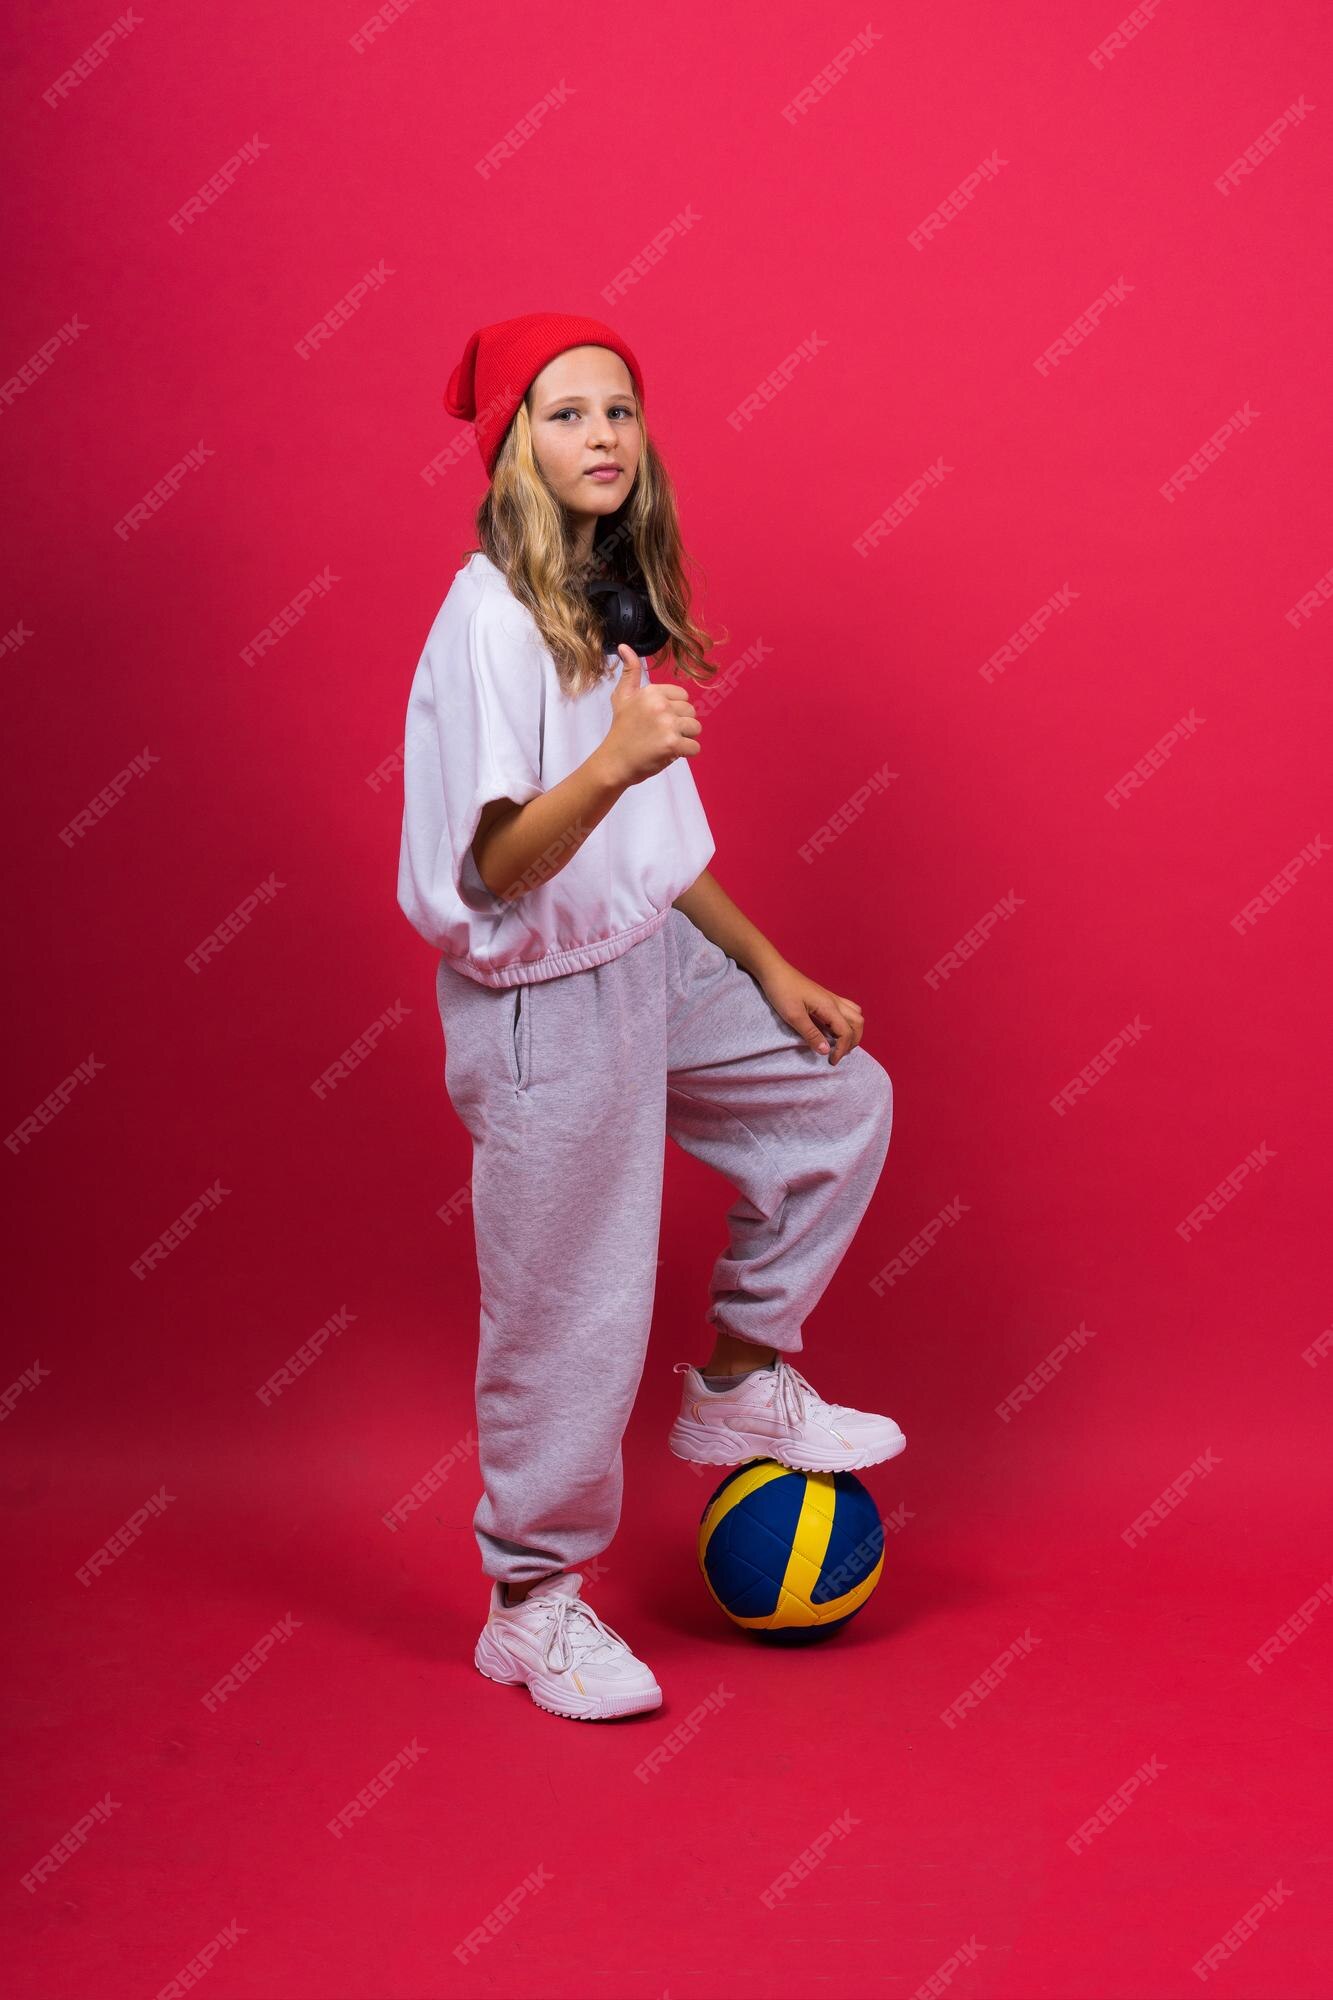 Premium Photo | Portrait of a cute eight year old girl in volleyball outfit  isolated on a red background